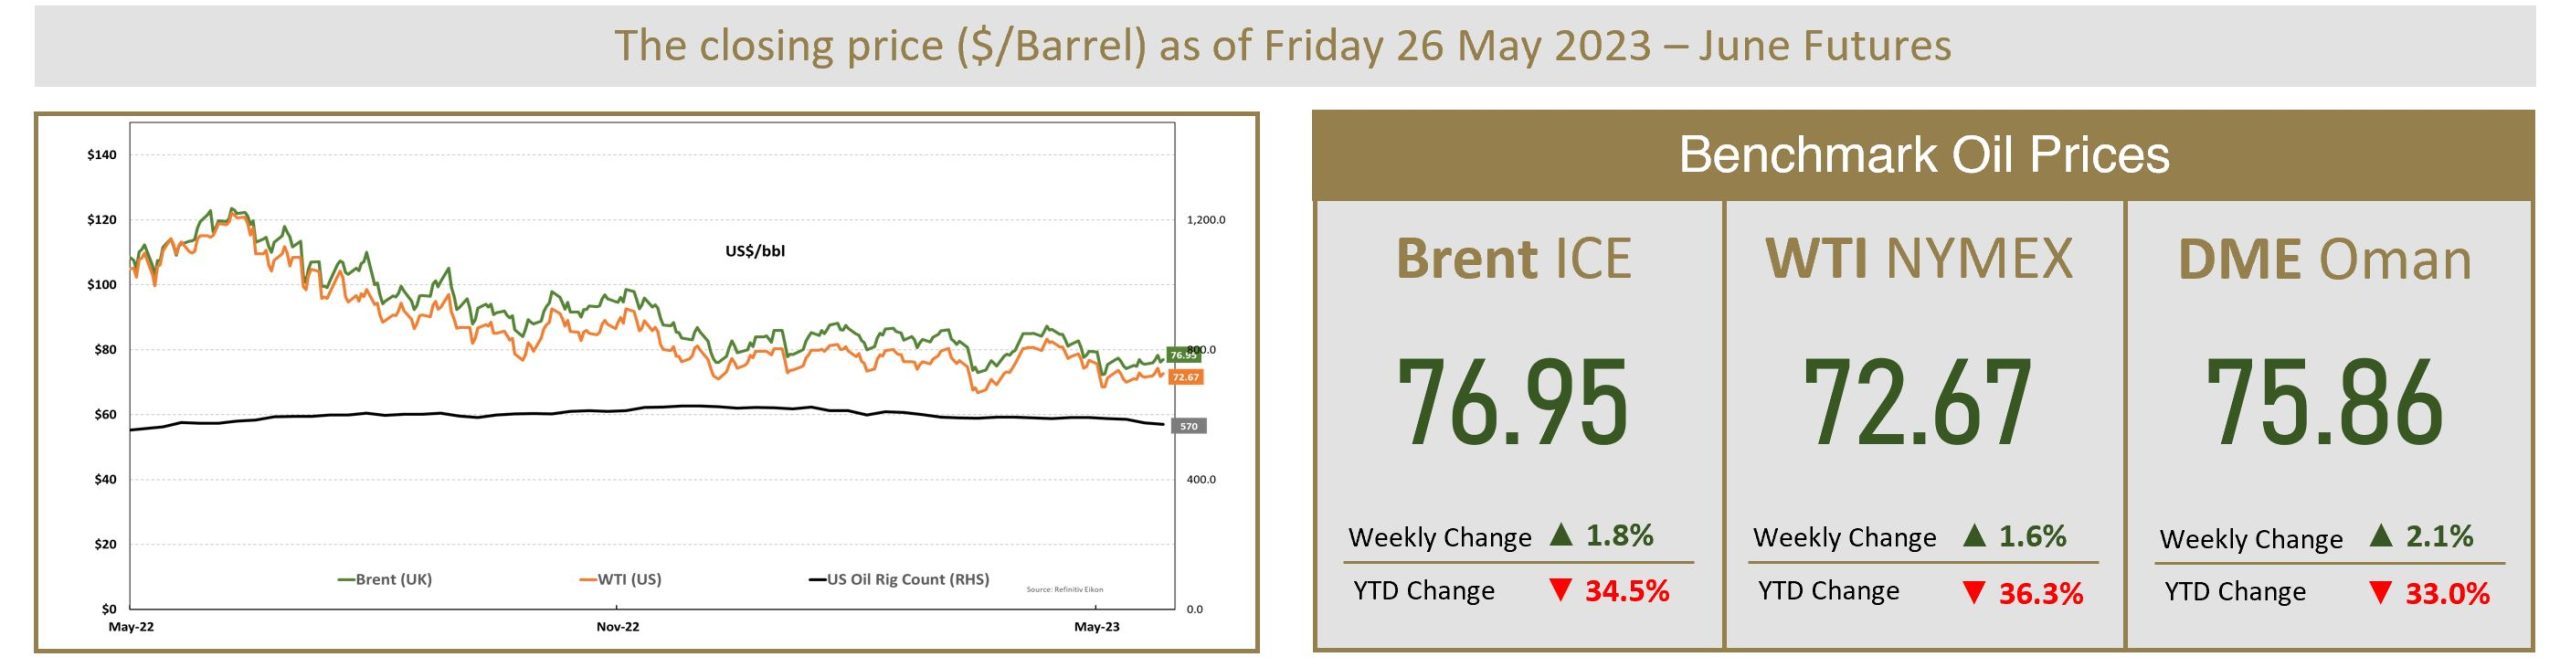 Benchmark Crude Oil Prices 27 May 2023